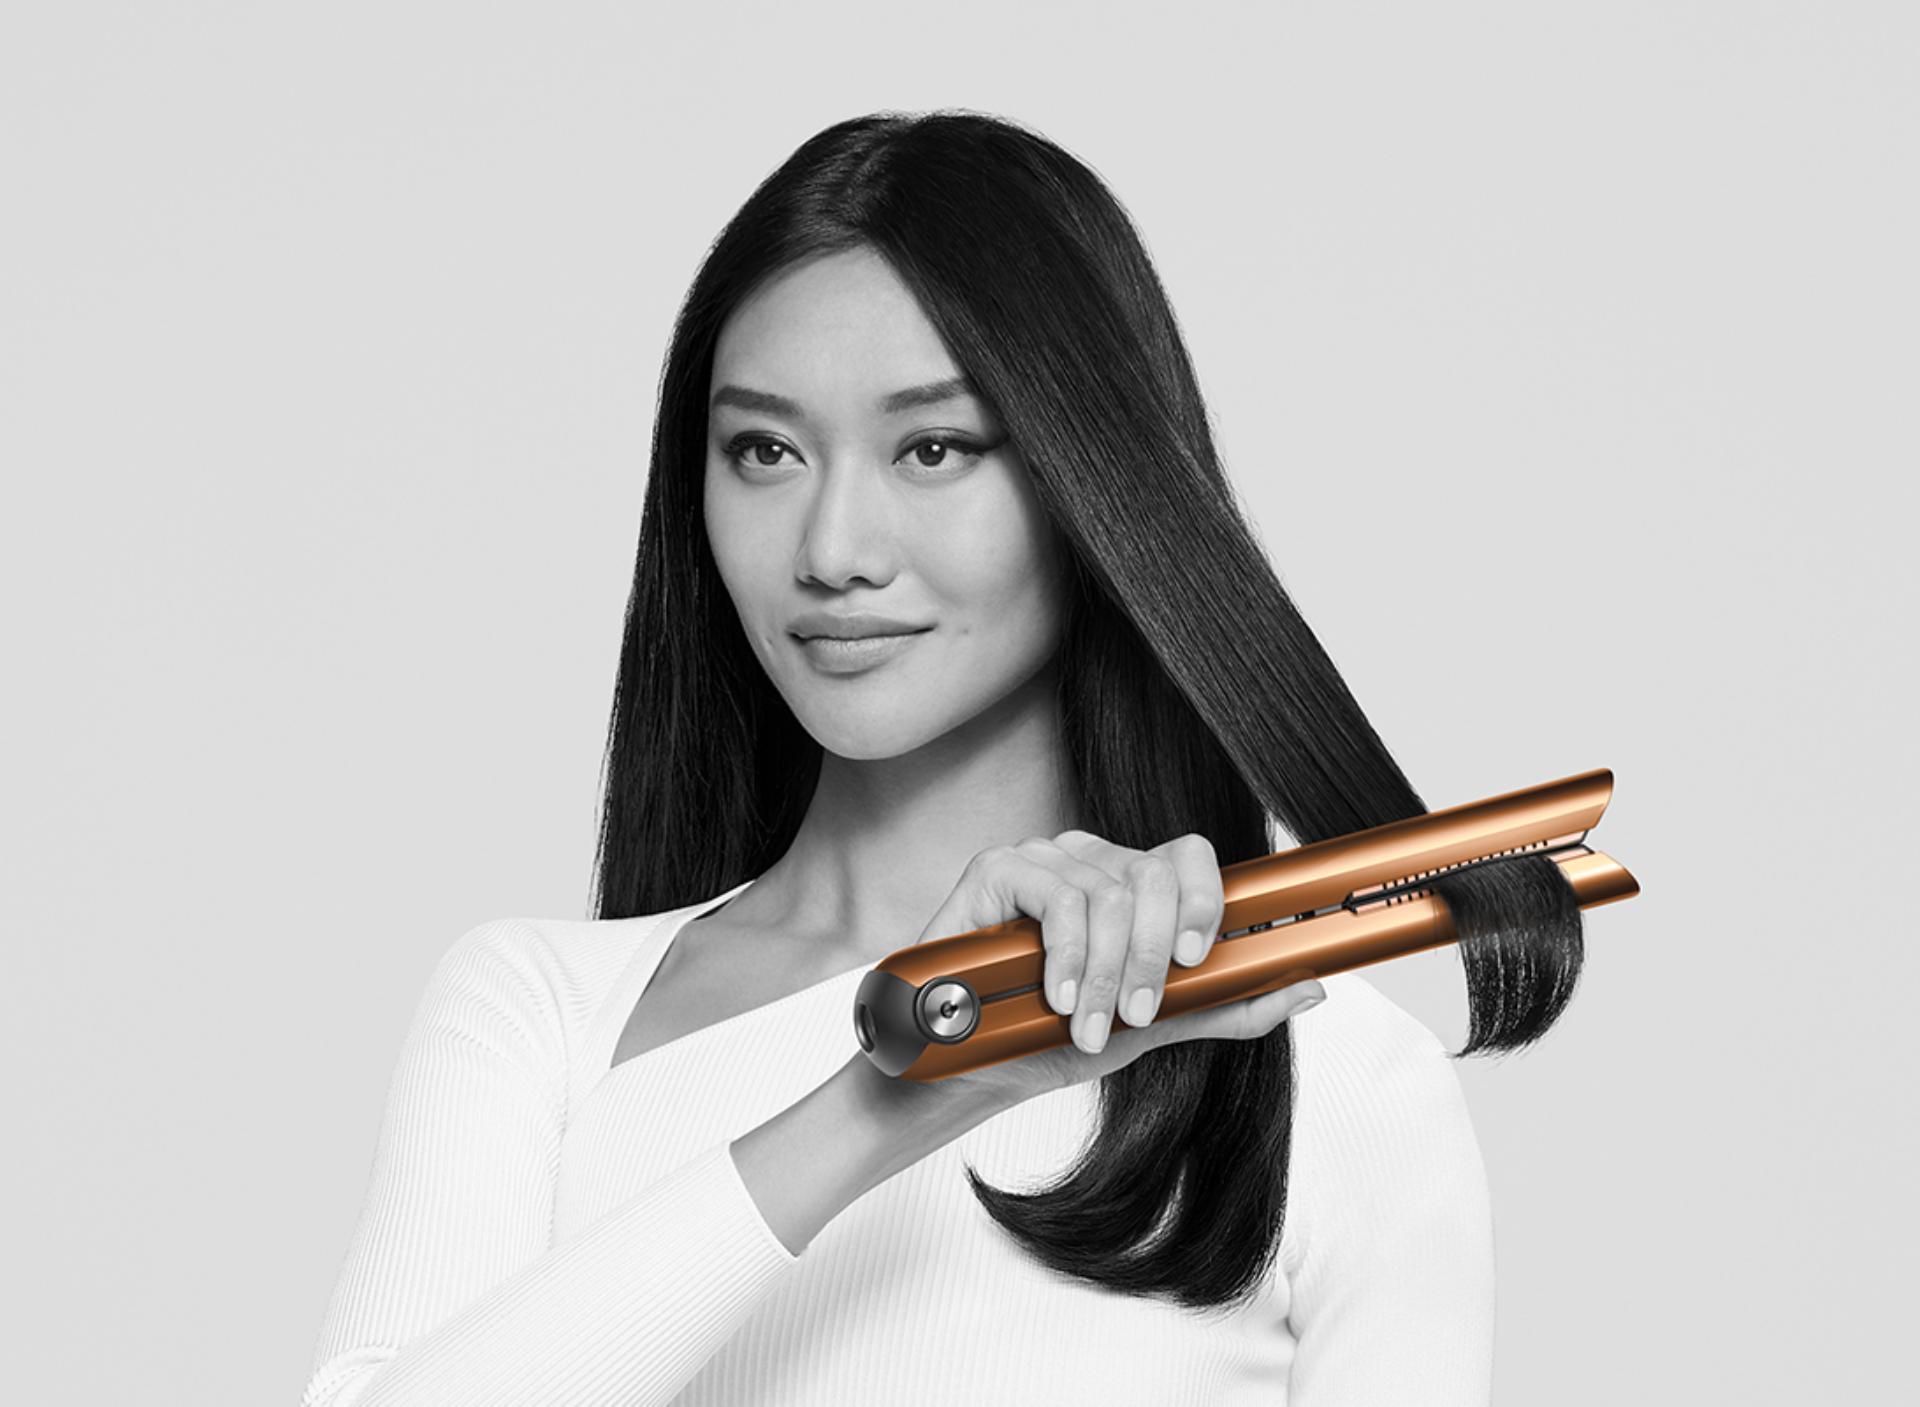 A model using the Dyson Corrale straightener